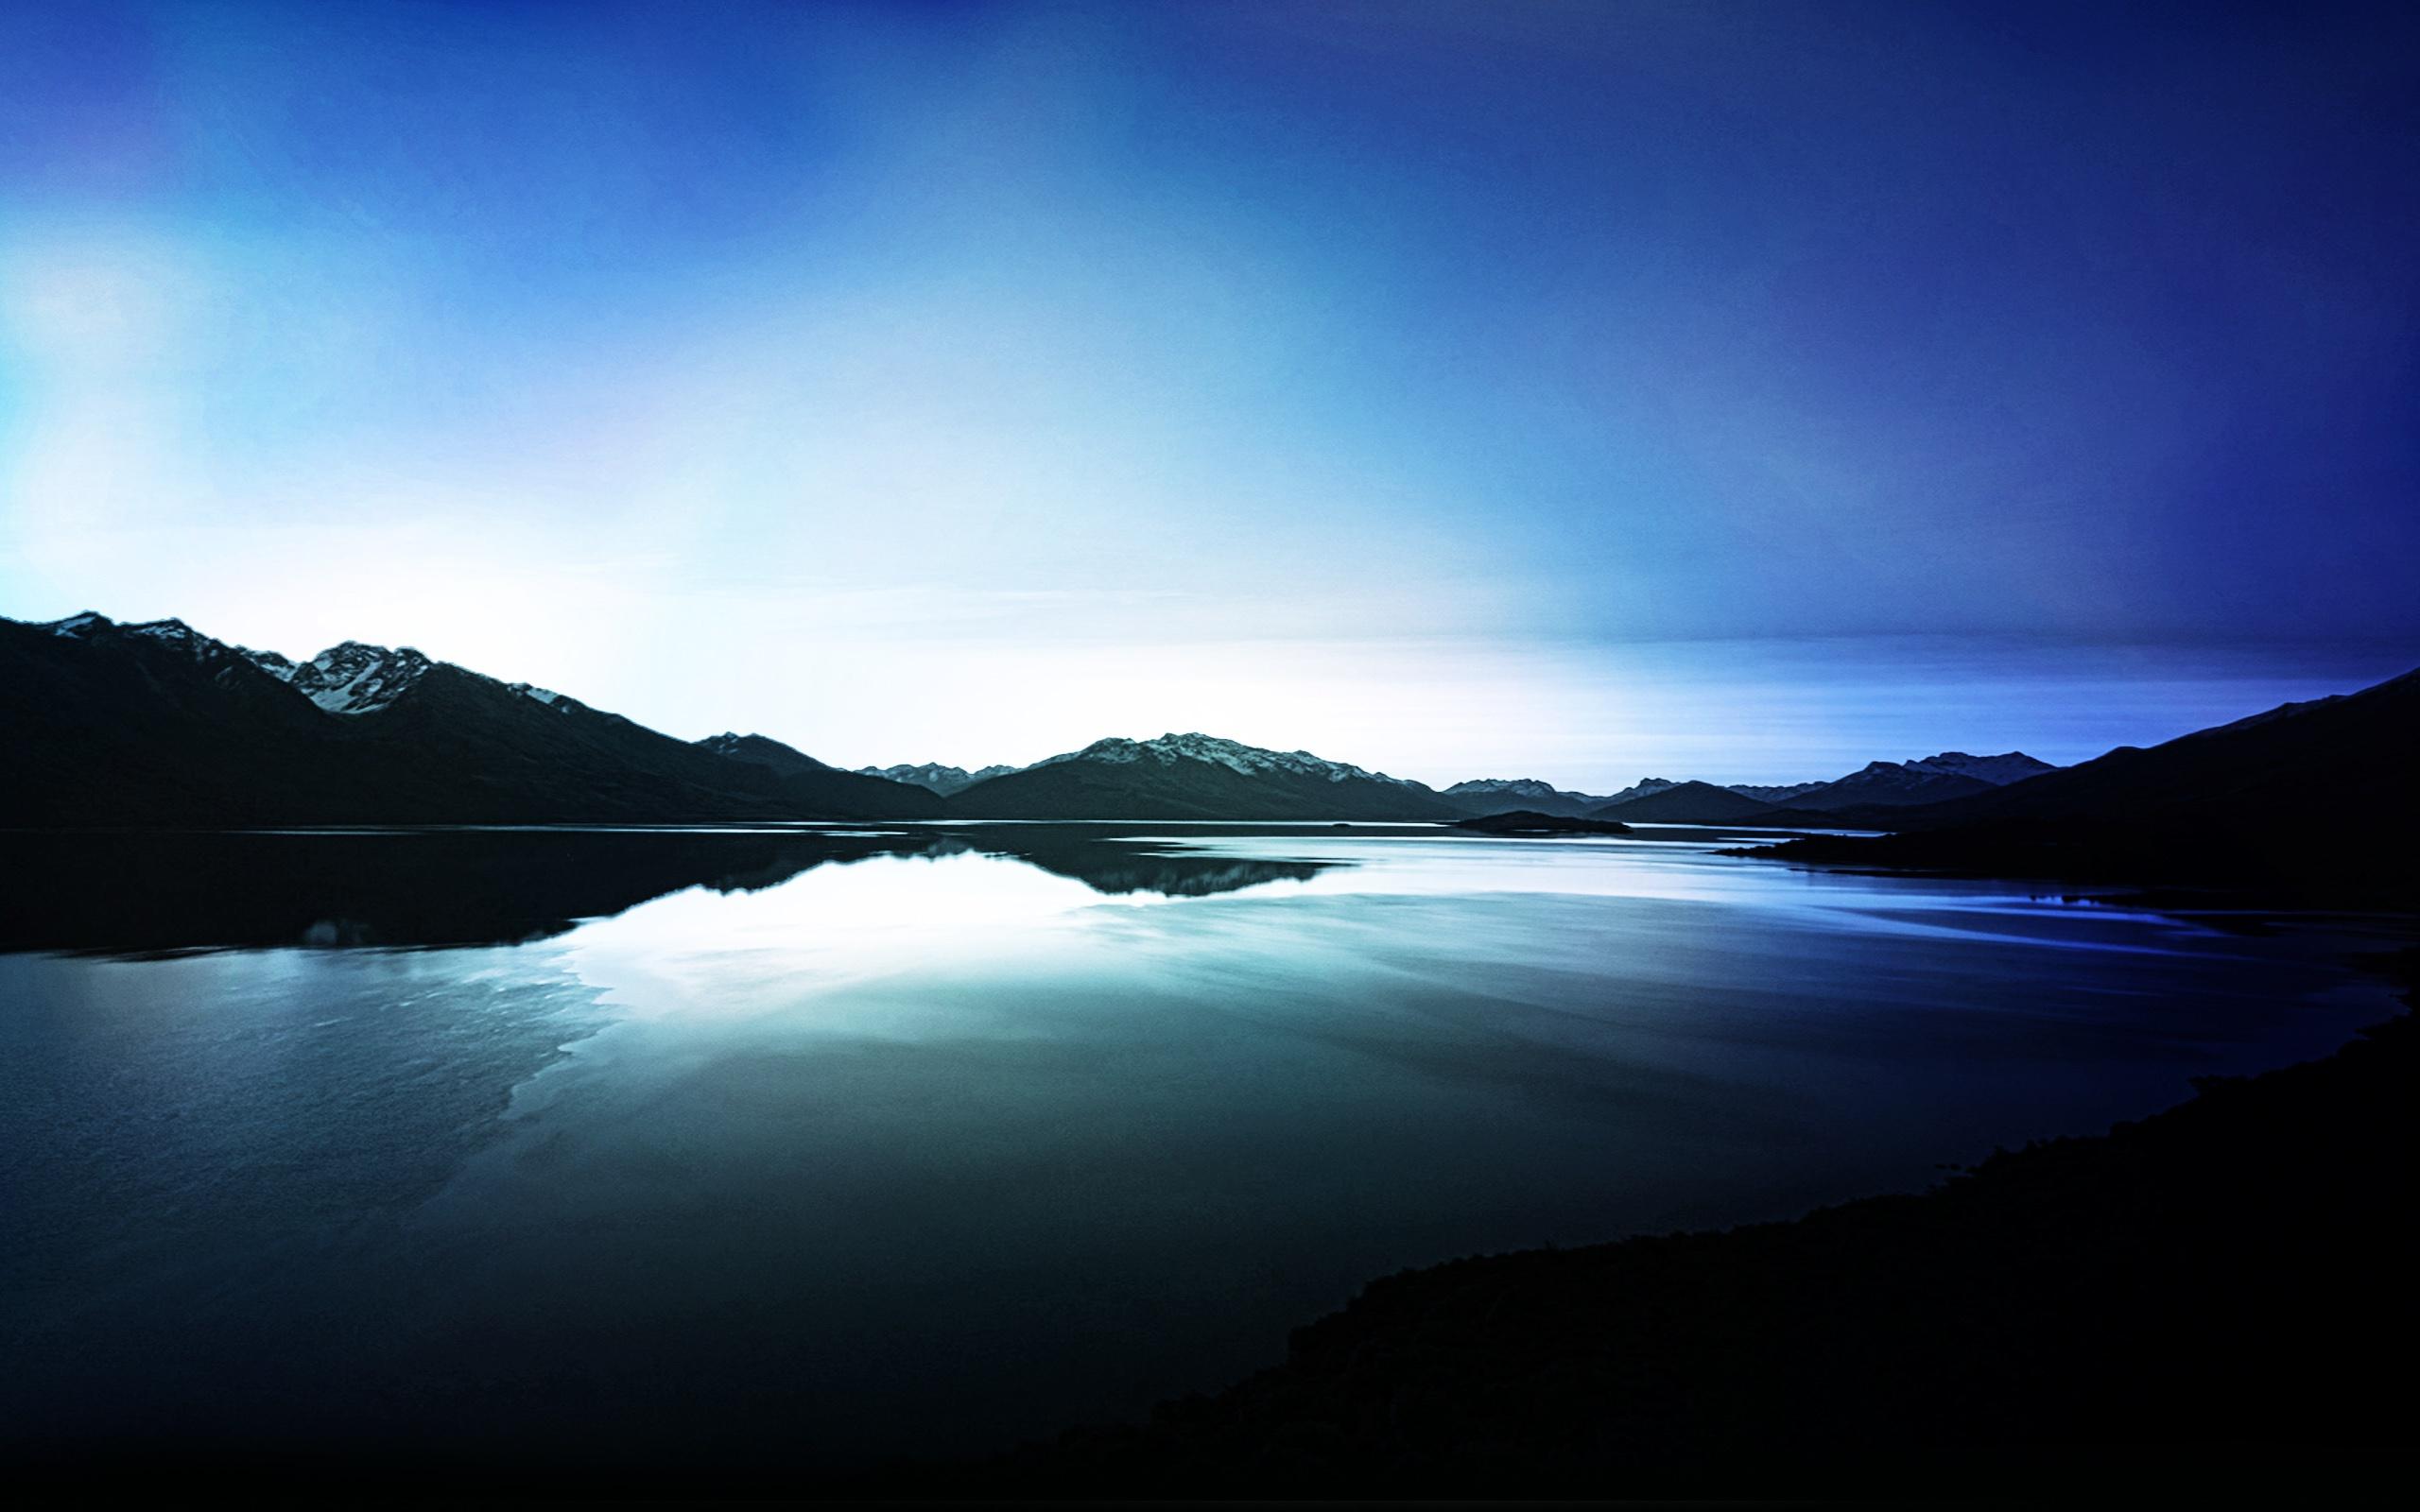 Dark Lake View Reflections Wallpaper in jpg format for free